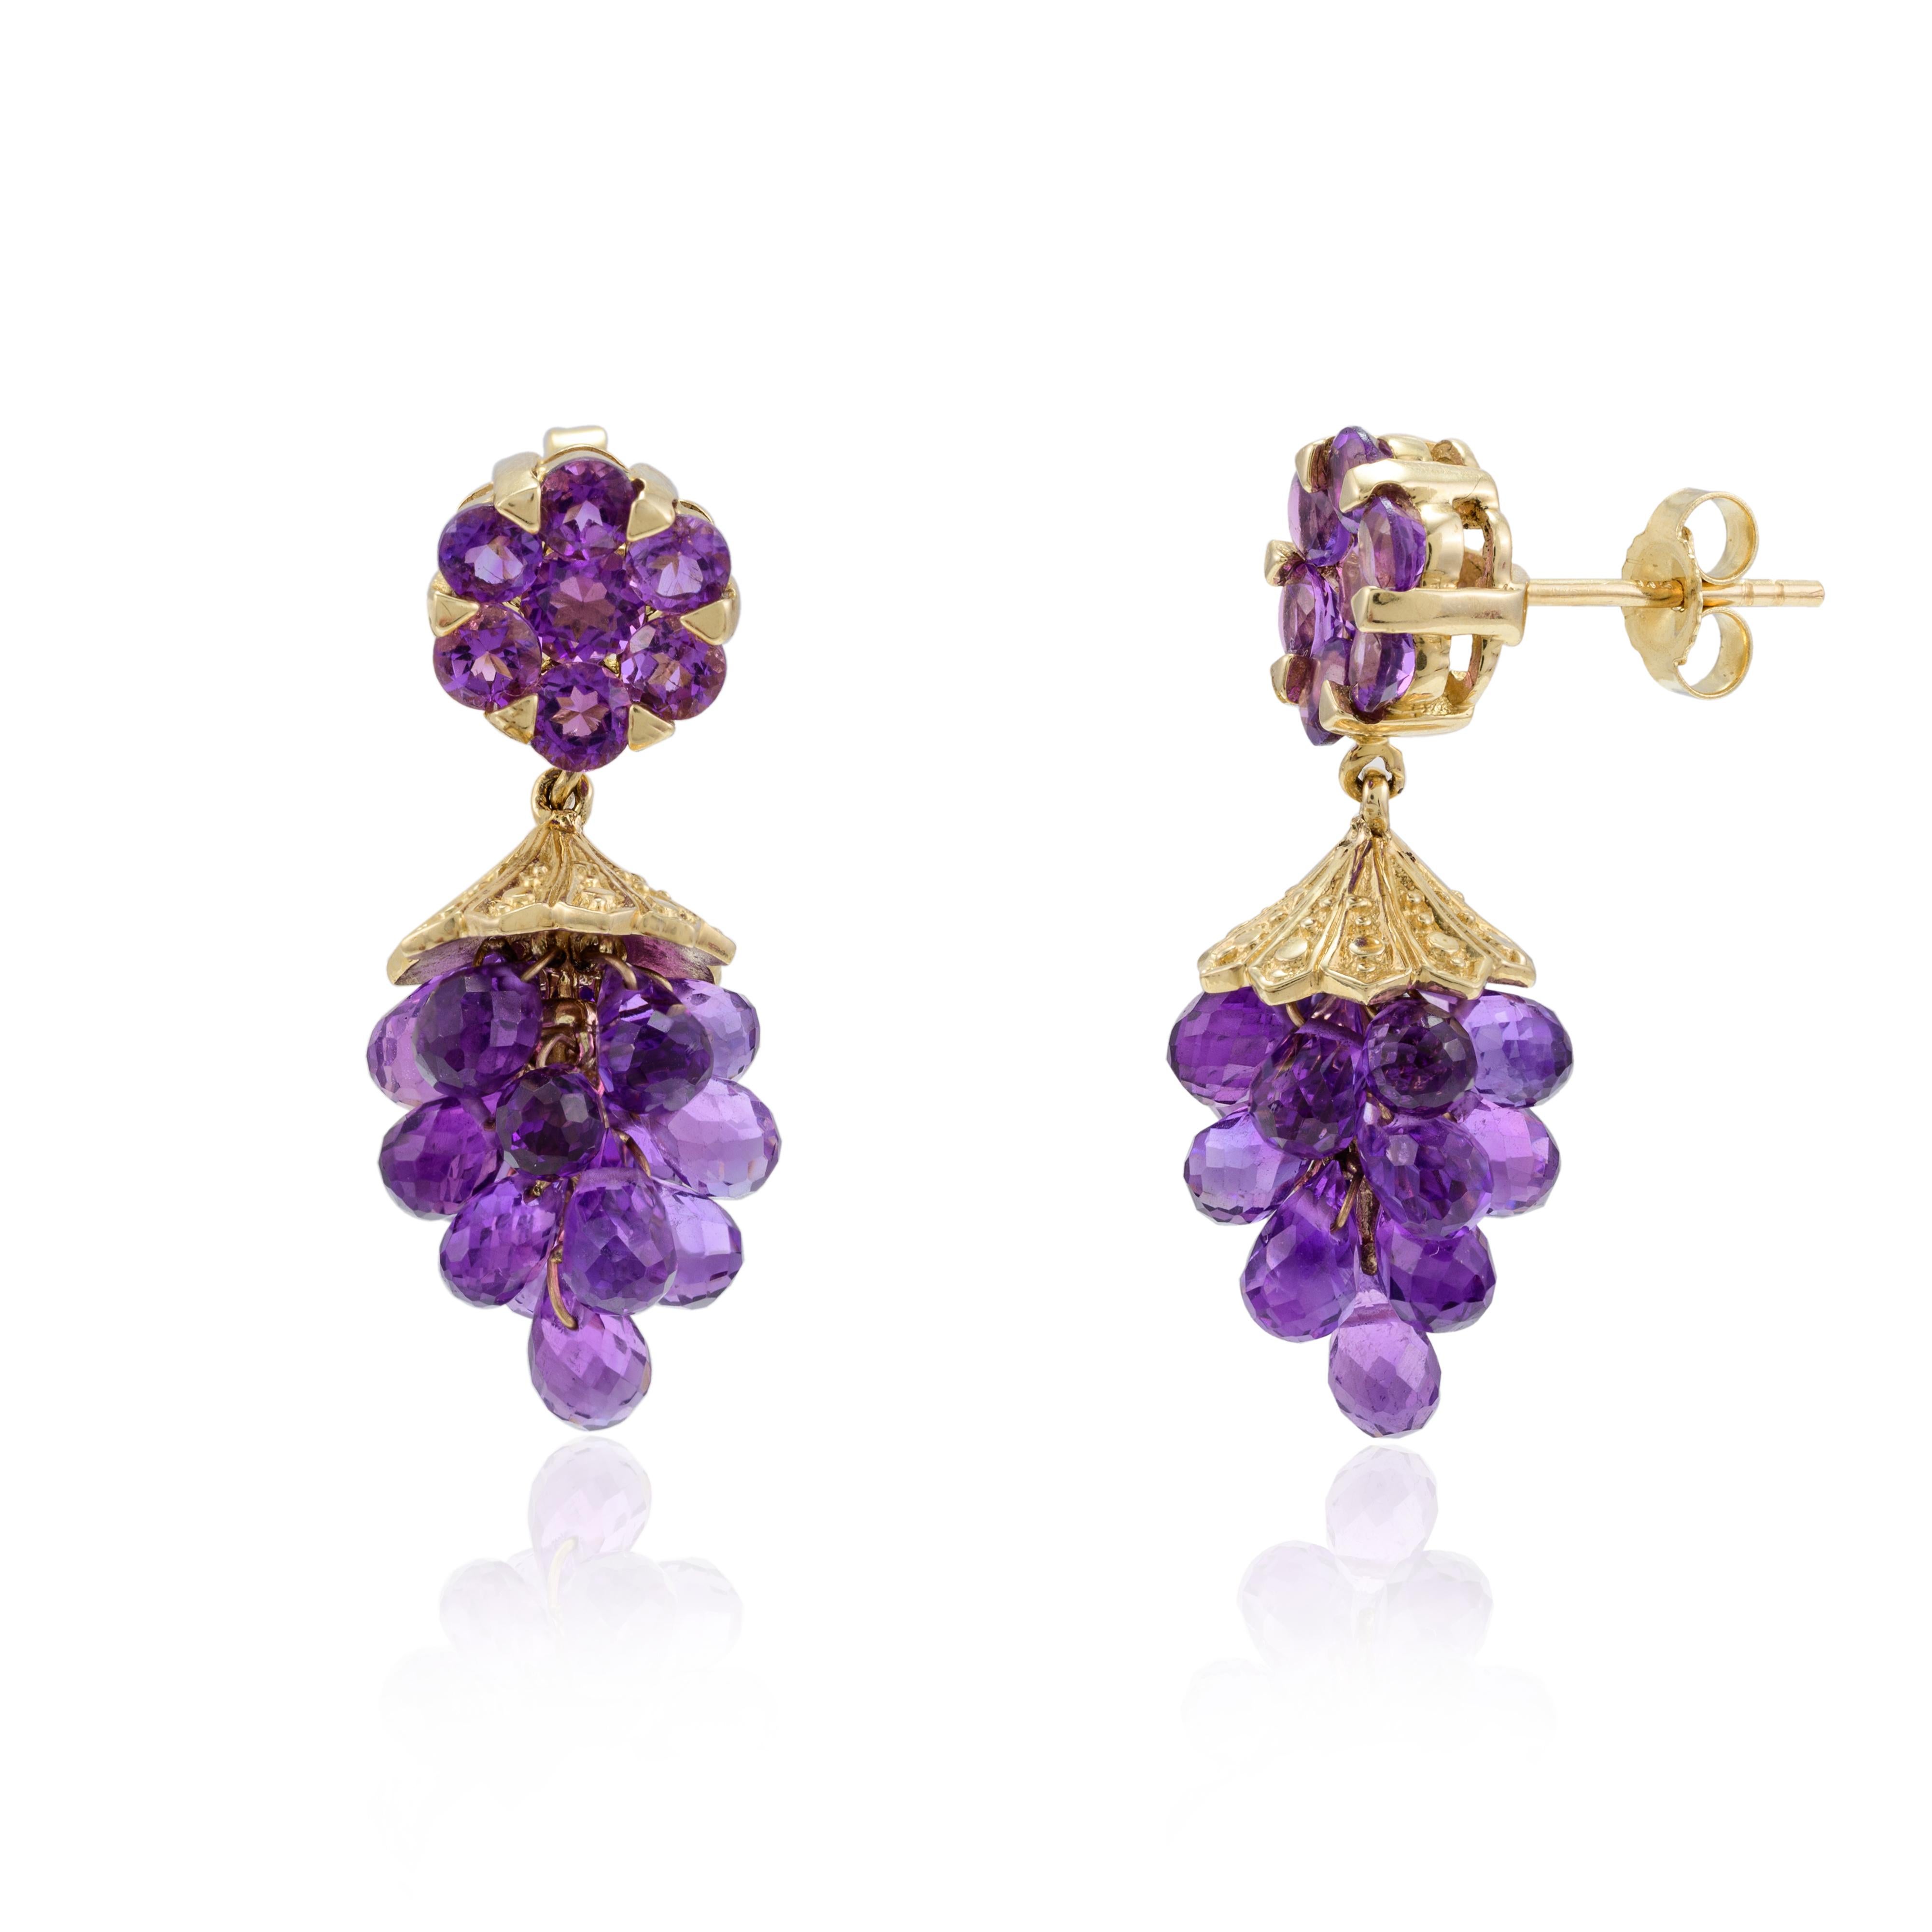 Mixed Cut 14.18 Carats Amethyst Gemstone Grapes Dangle Earrings 14k Solid Yellow Gold For Sale